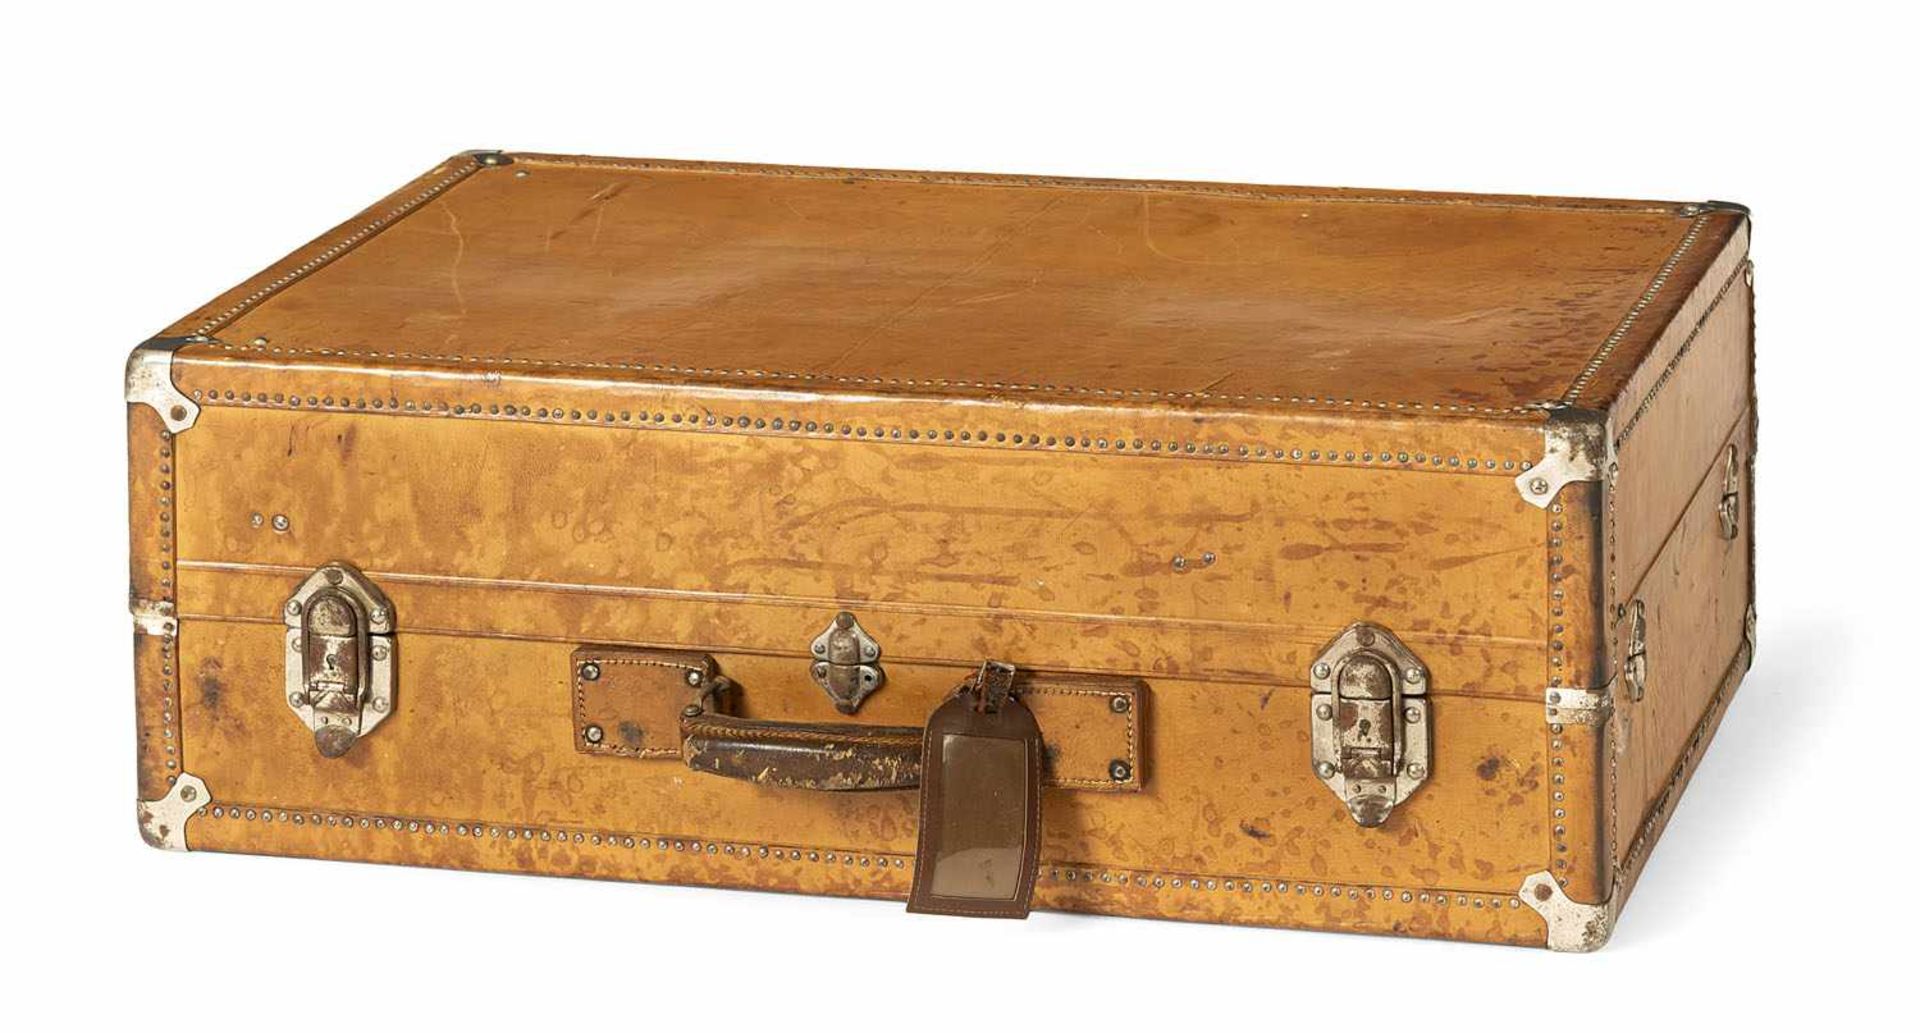 VINTAGE LEATHER SUITCASE, early 20th century. Damages due to age, worn.